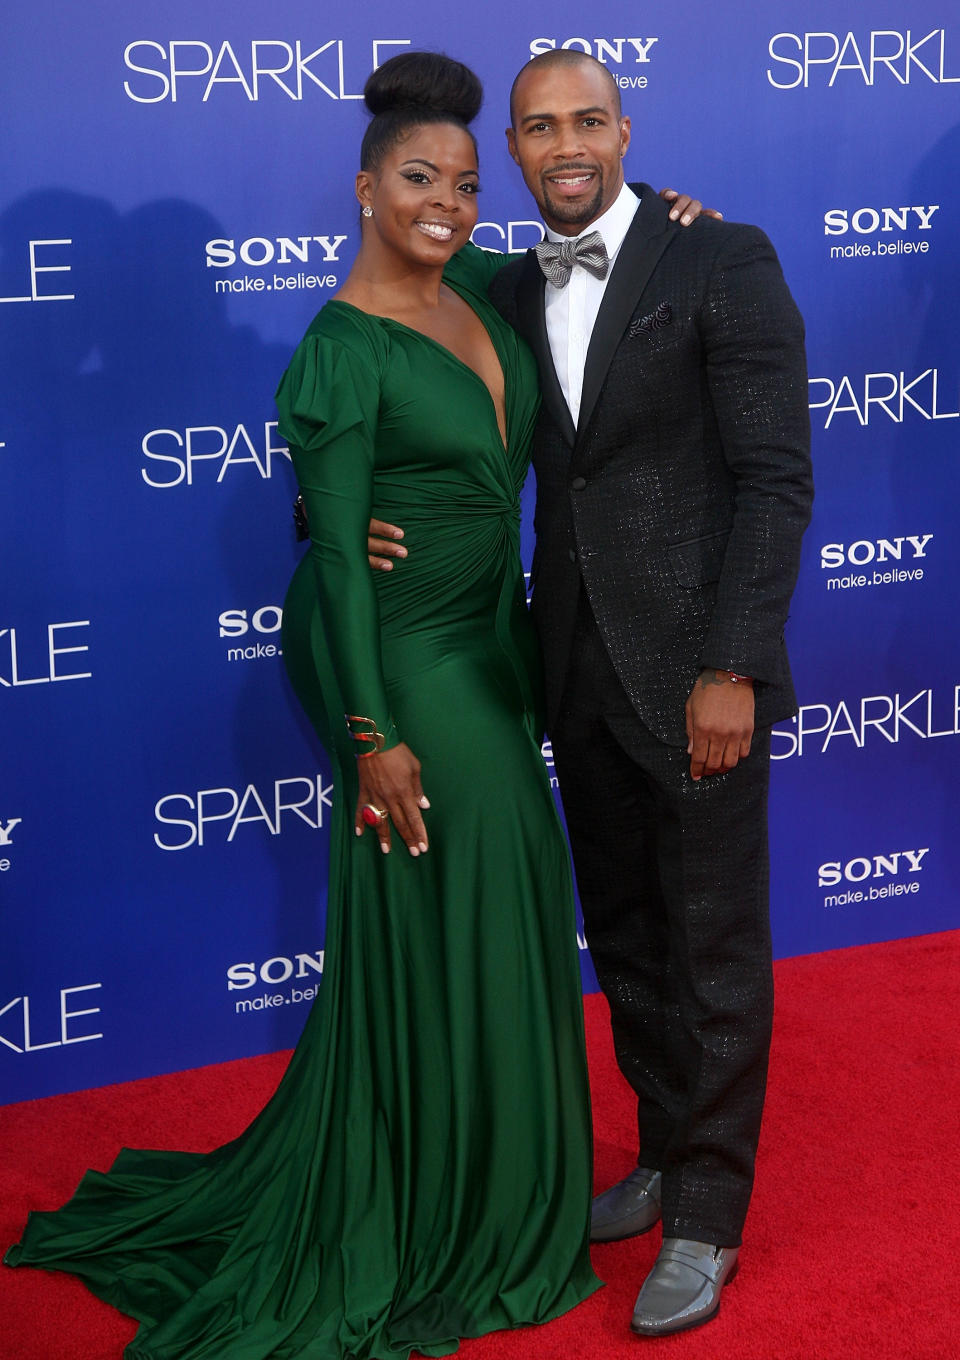 Bre'ly Evans and Omari Hardwick at the Los Angeles premiere of "Sparkle" on August 16, 2012.